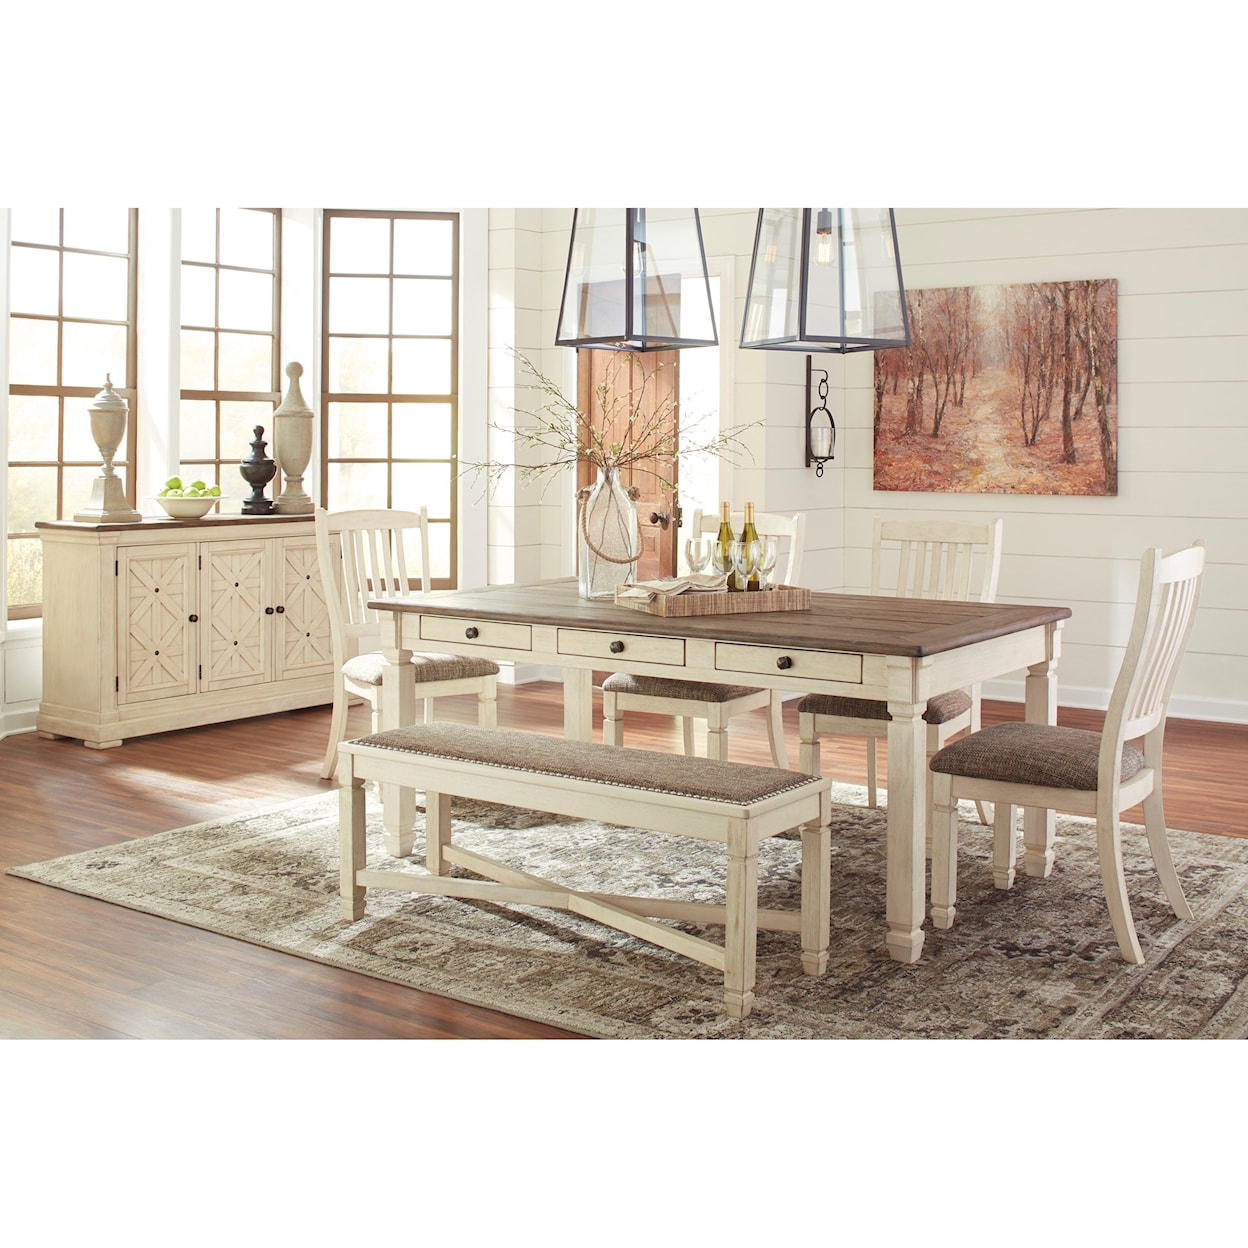 Signature Design by Ashley Bolanburg Formal Dining Room Group